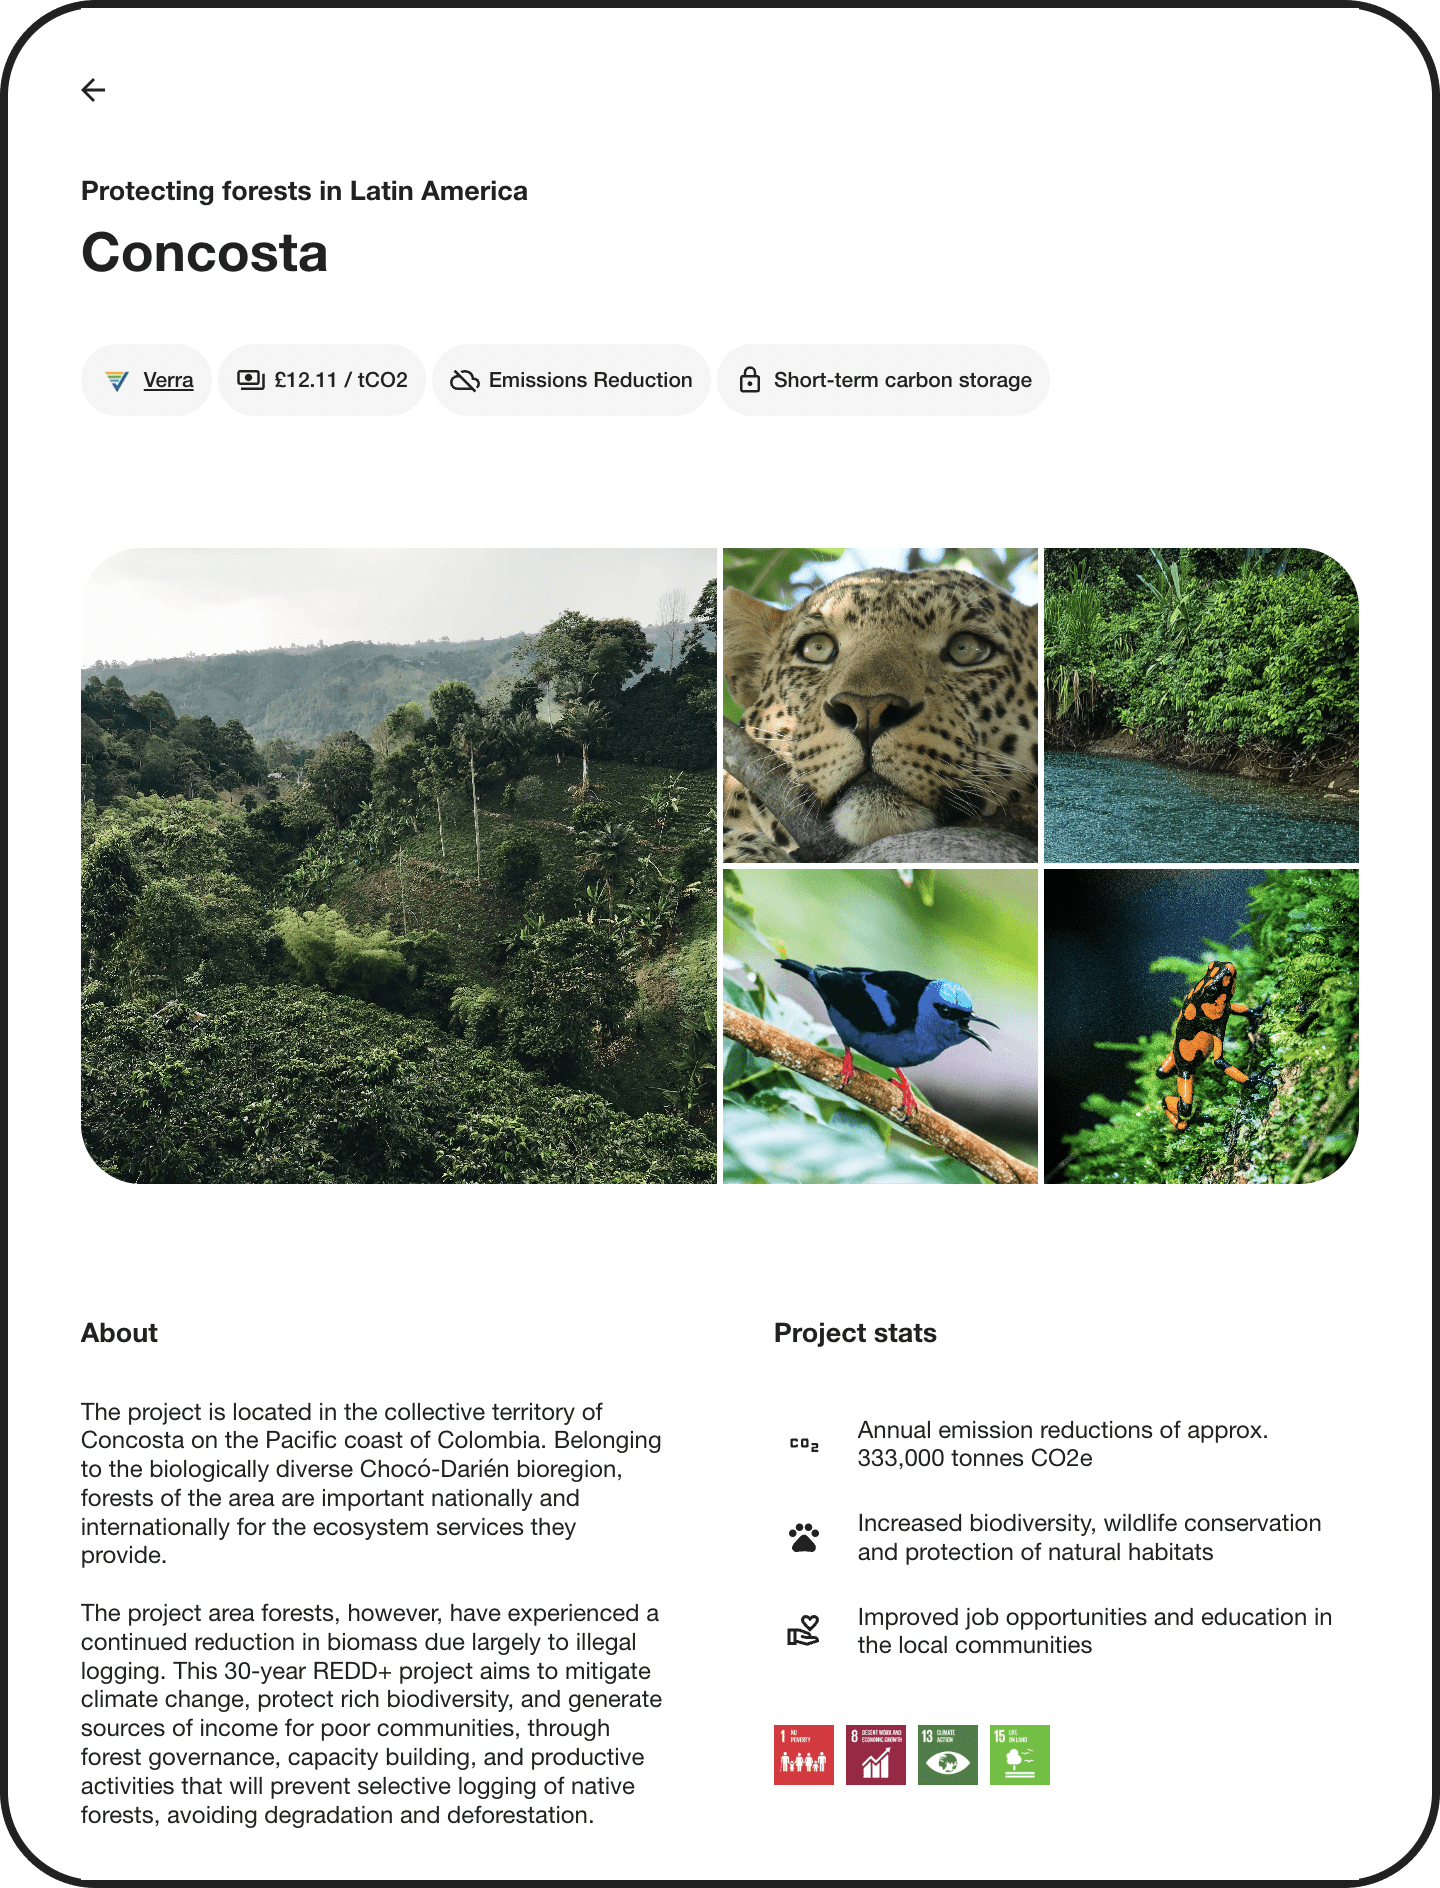 A screenshot showing the concosta forest conservation project's page in the Lune dashboard